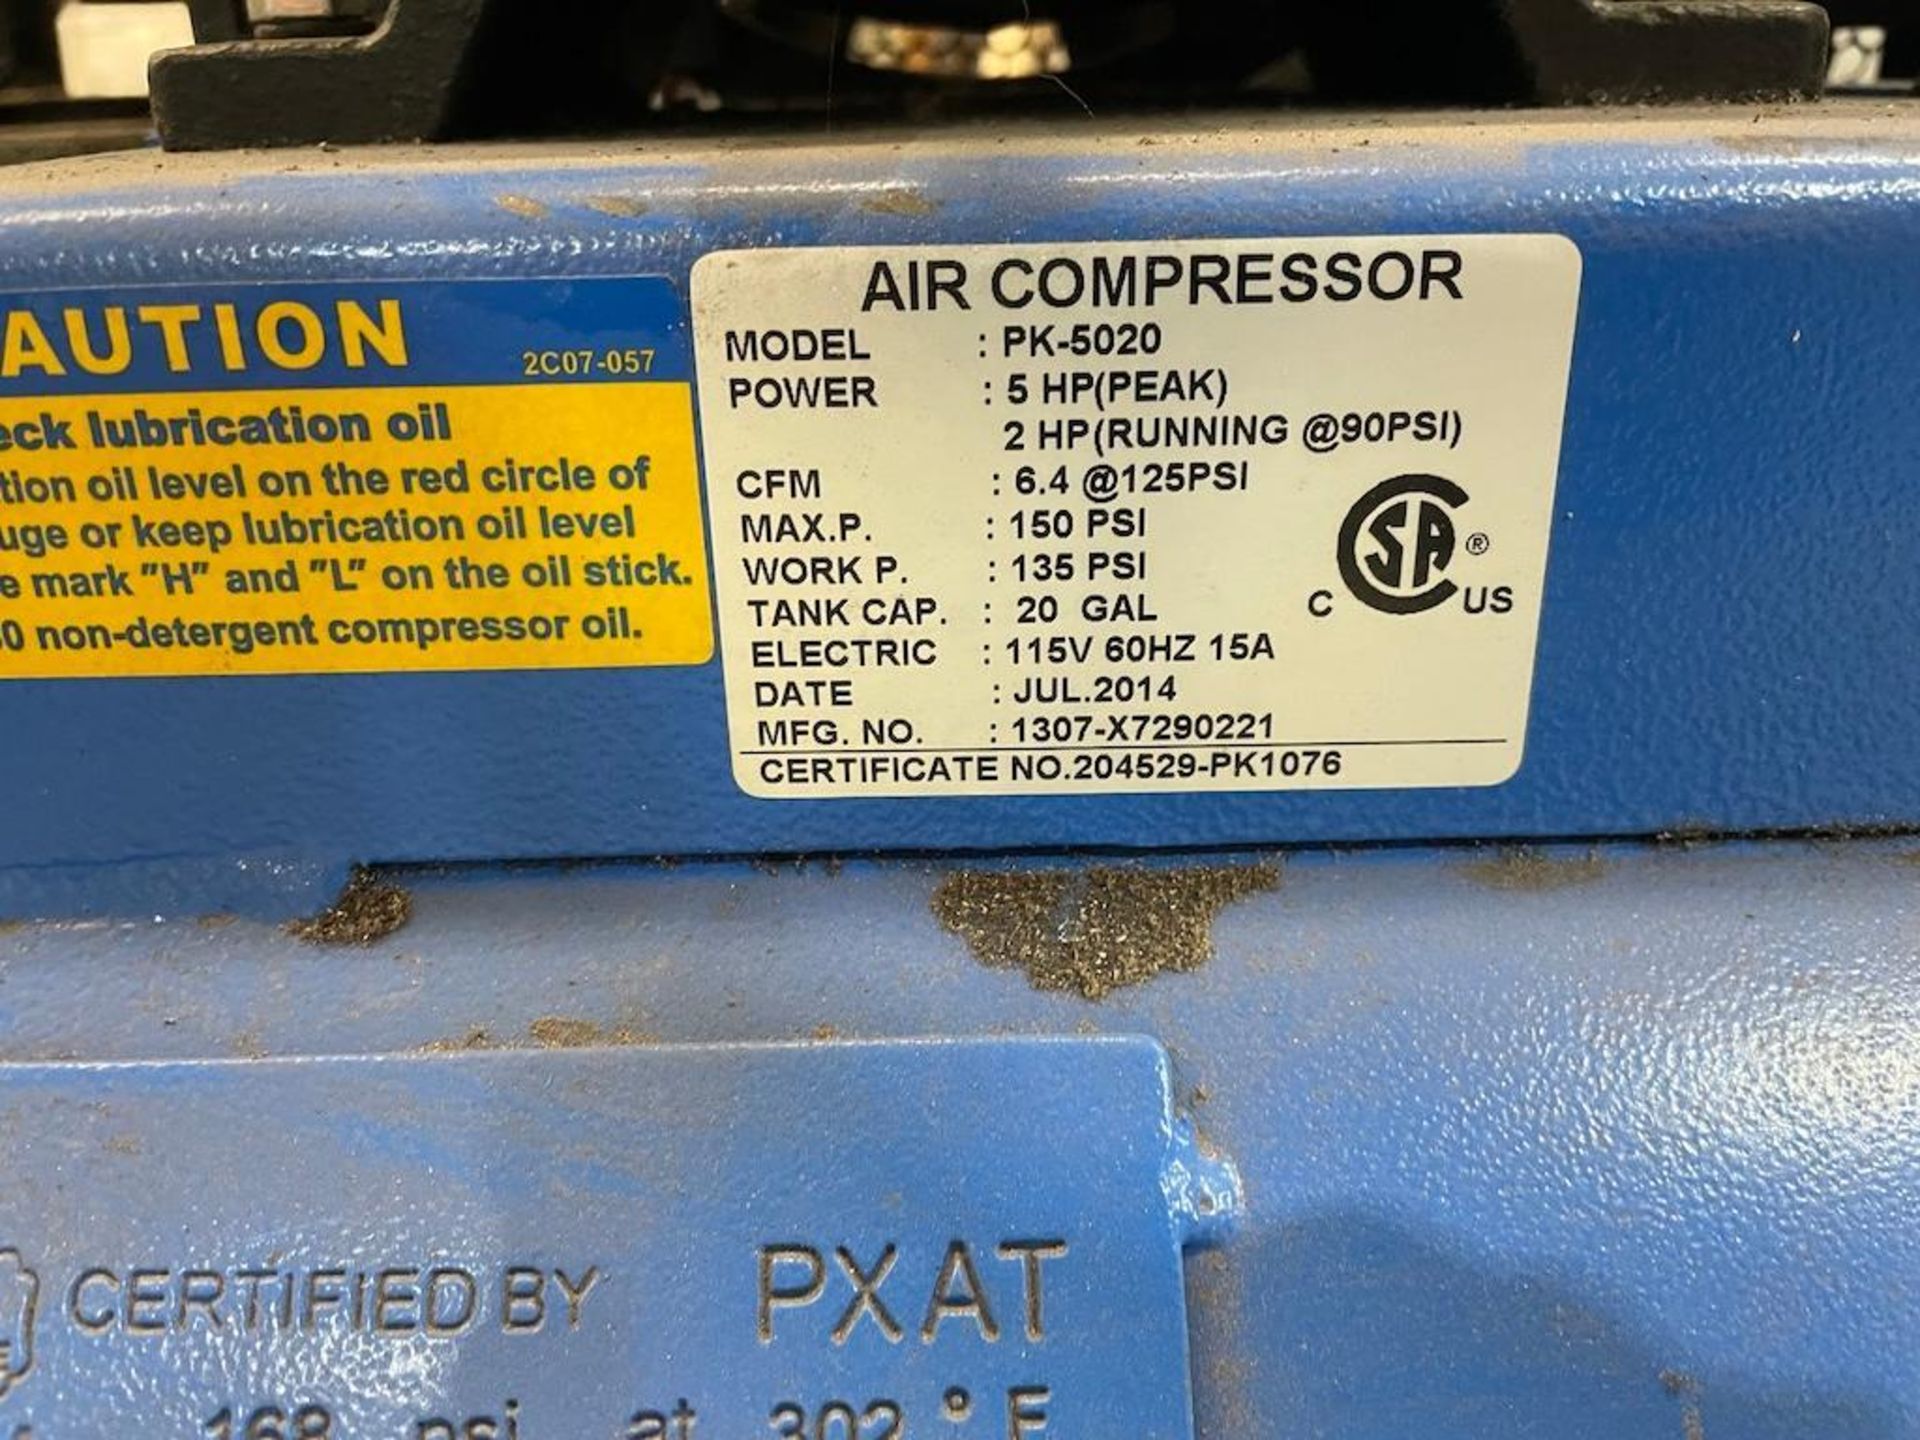 OMEGA PRO 2 HP PORTABLE AIR COMPRESSOR [TROIS RIVIERES] *PLEASE NOTE, EXCLUSIVE RIGGING FEE OF $50 W - Image 2 of 2